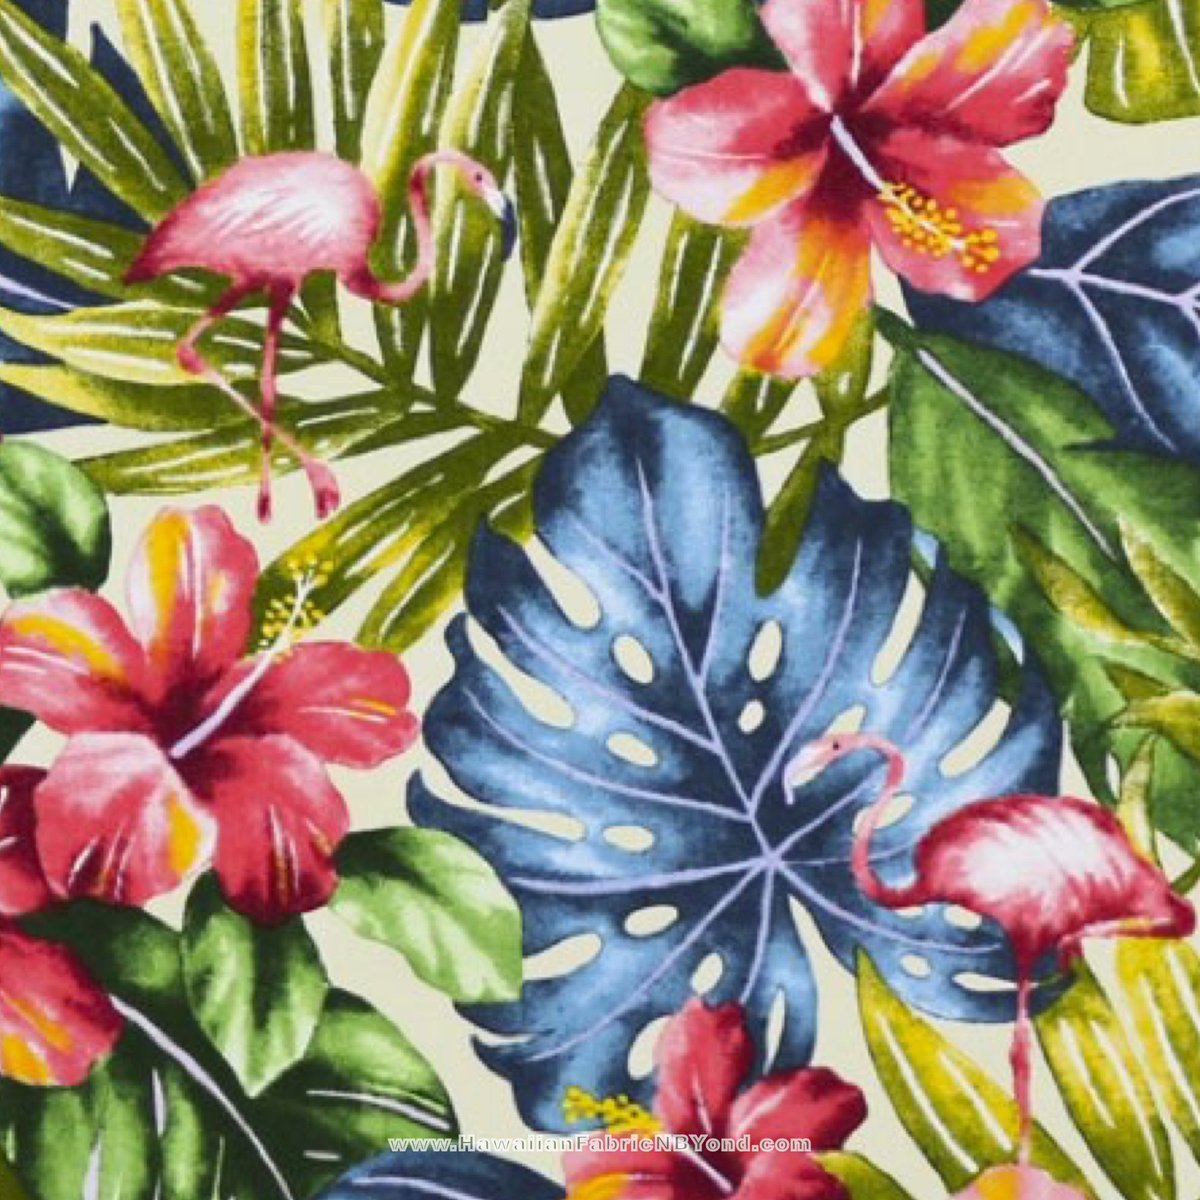 New arrival to my #etsy shop: Beautiful flamingo floral fabric Sold at 👉 etsy.com/shop/HawaiianF… #cottonfabric #flamingos #fabrichawaii #sewing #quilting #ebay #fabricbytheyard #diydresses #tropical #floral